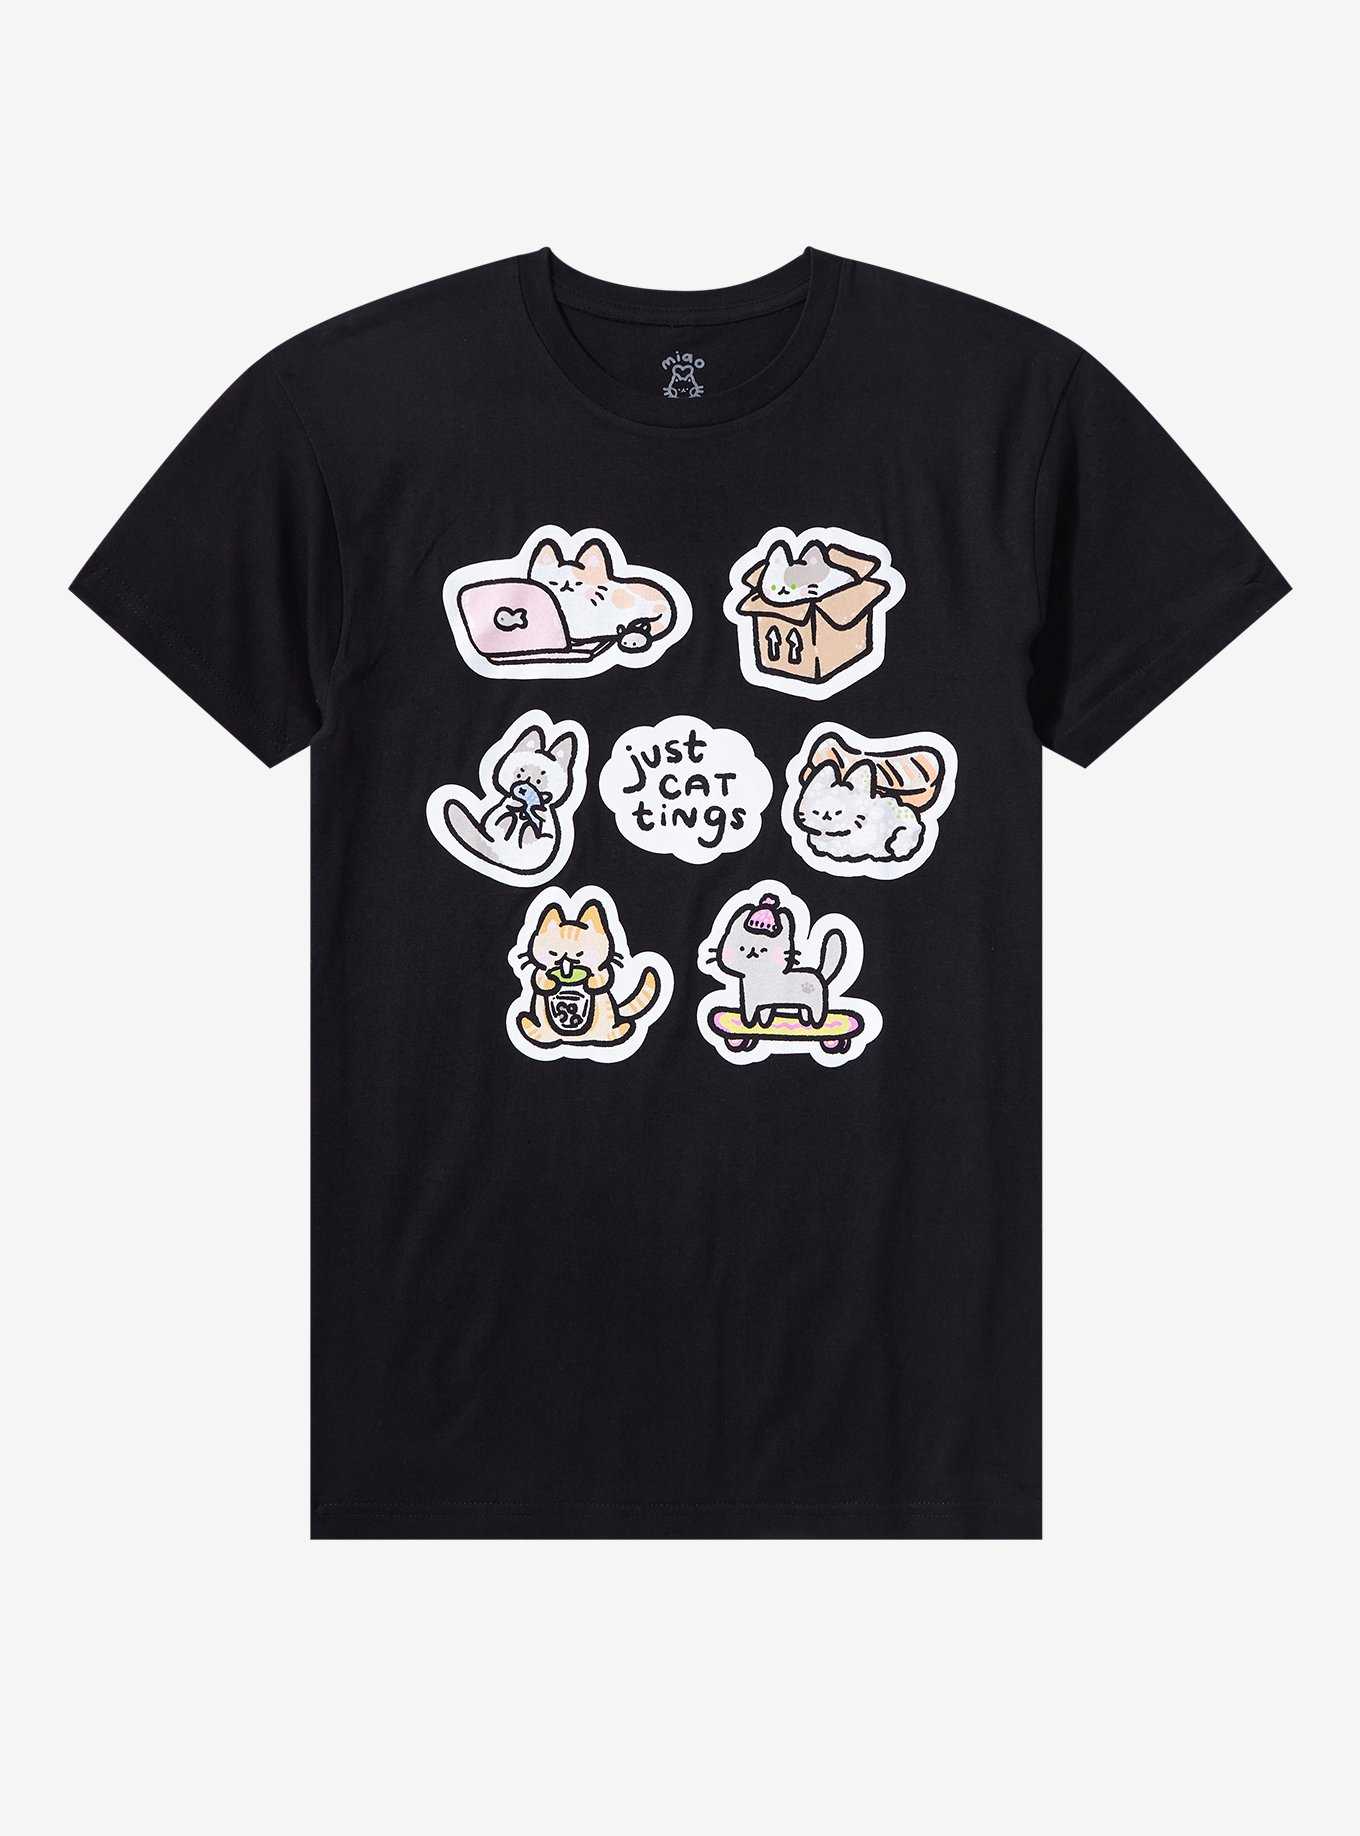 Just Cat Tings T-Shirt By Miao Cherii, , hi-res